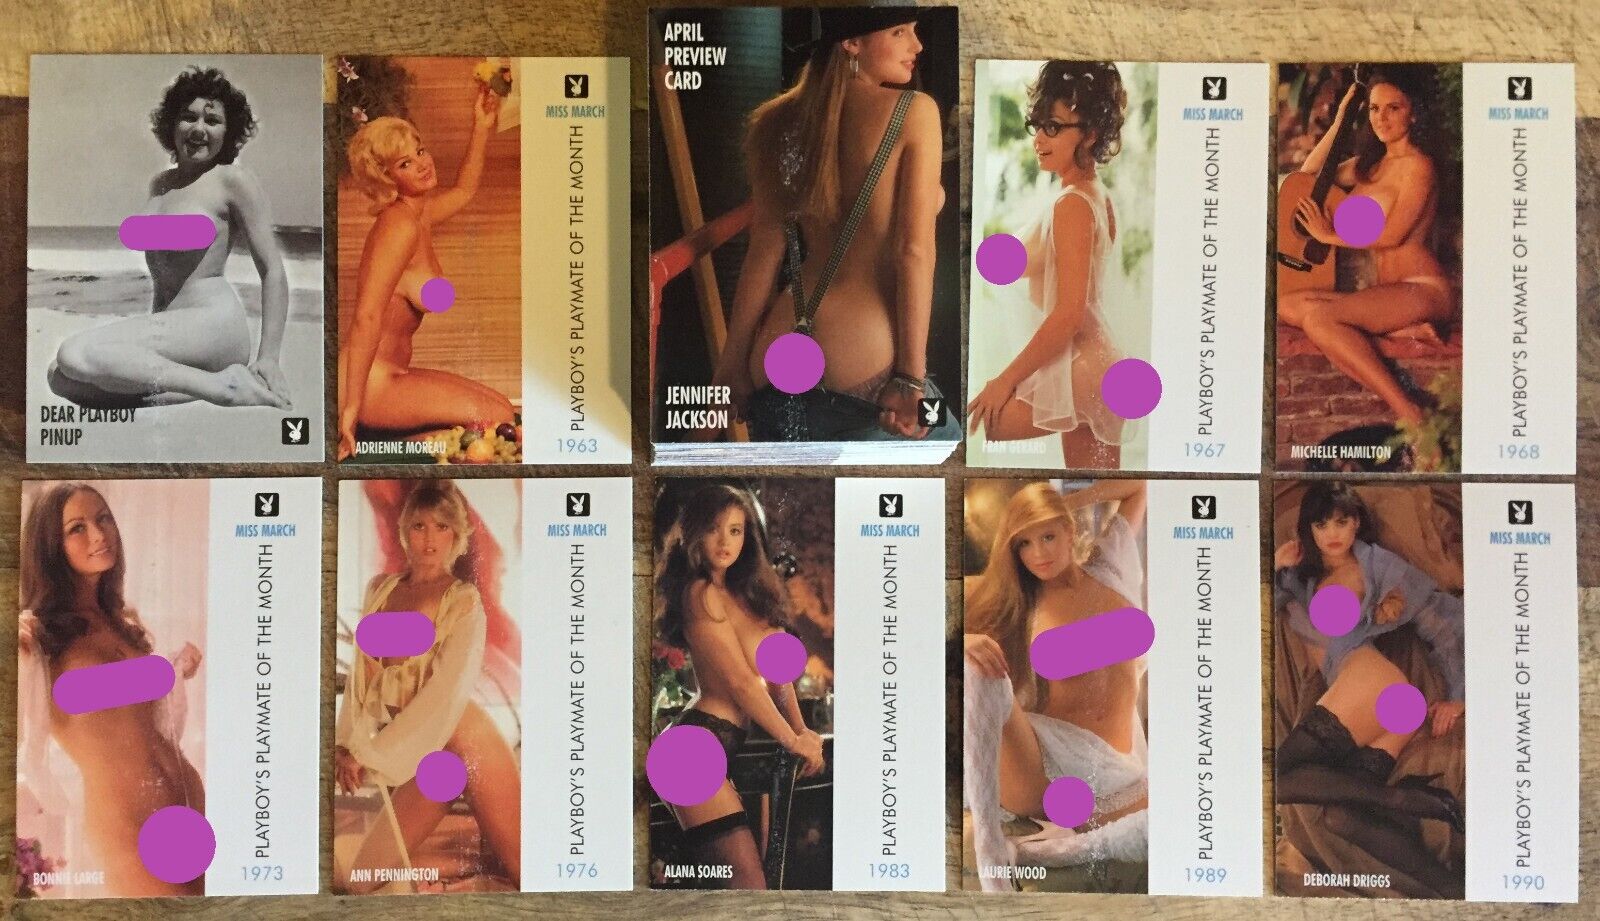 LOT of (57) Playboy March Centerfold Cards / PLAYMATES ONLY / Lightly Bricked